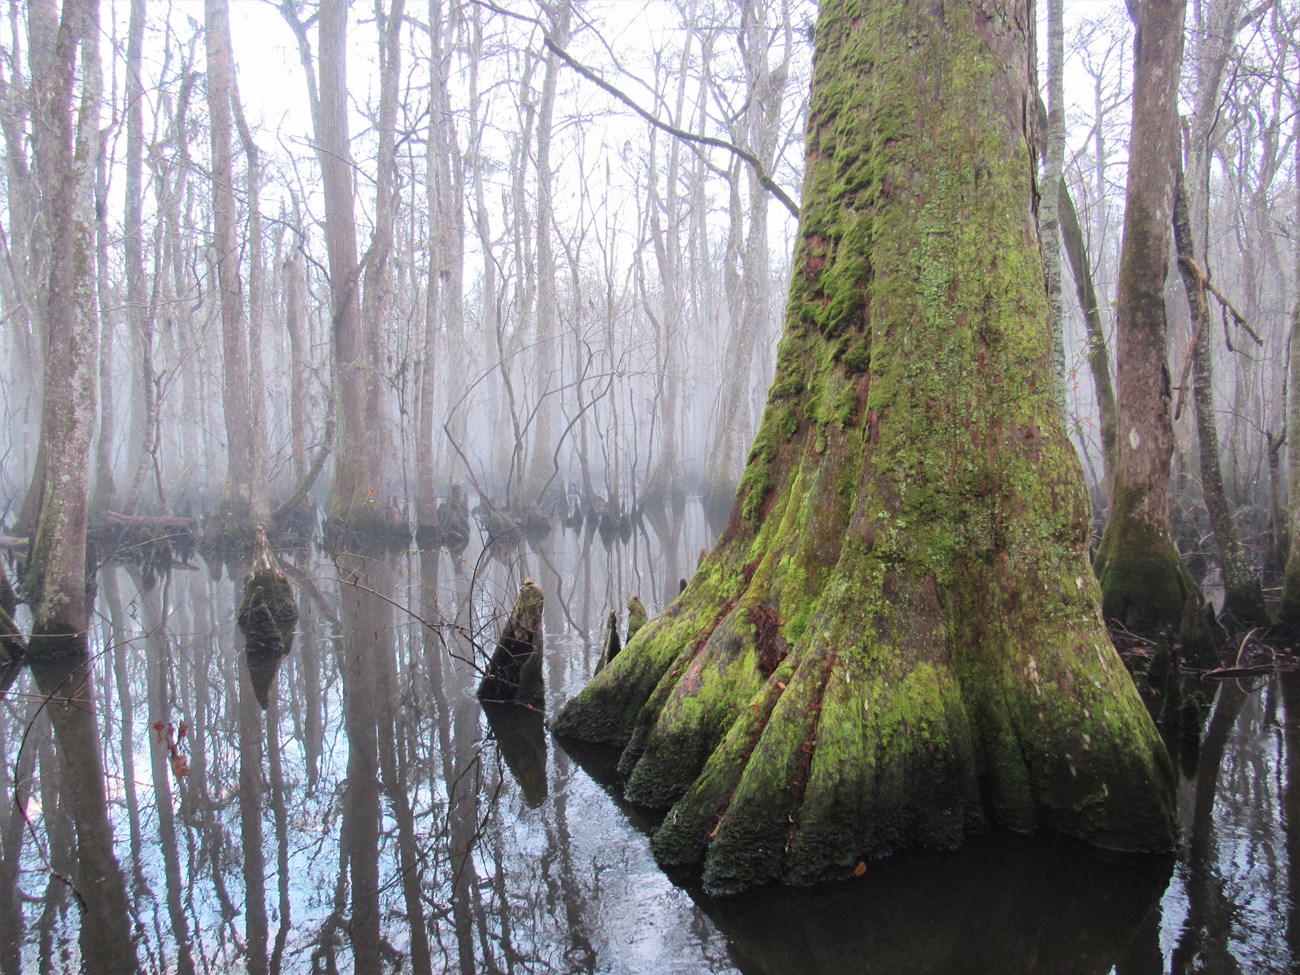 Photograph shows trees growing out of a large body of water.